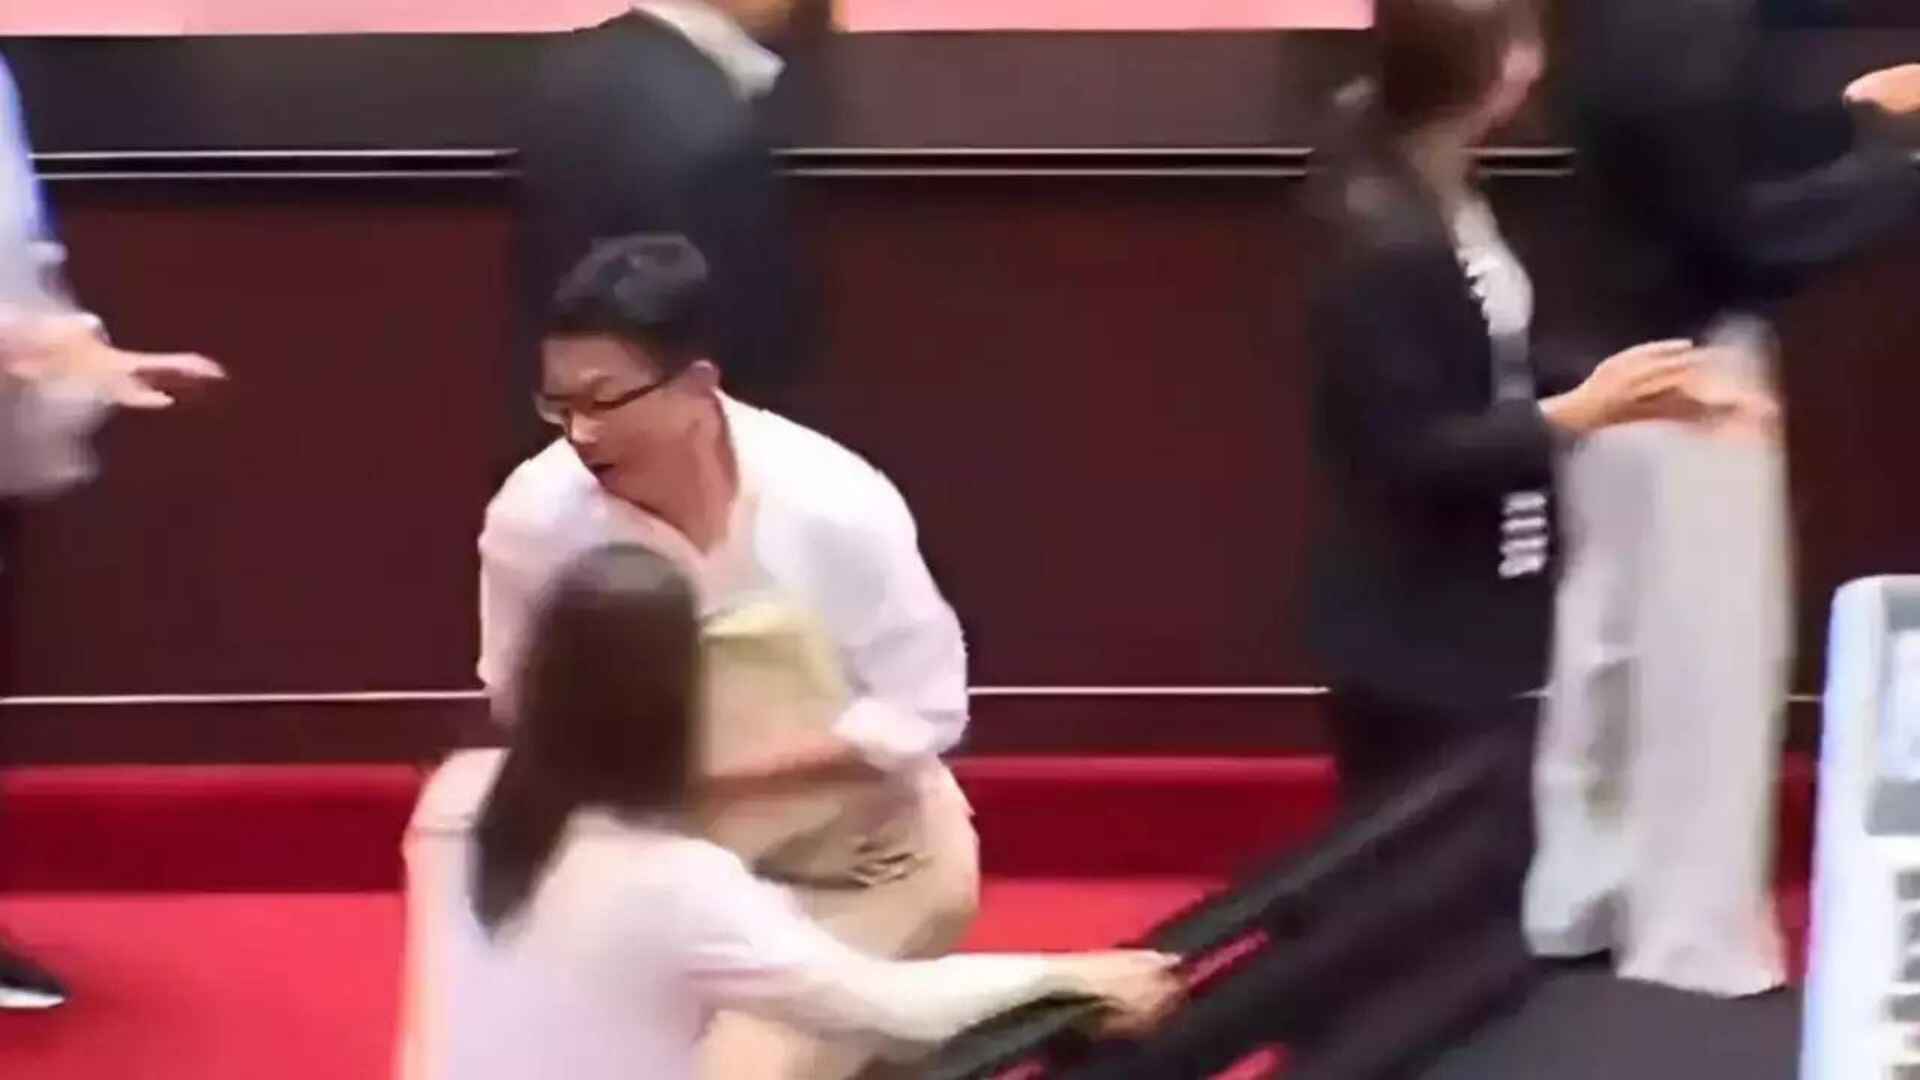 Watch: Chaos In Taiwan Parliament As MP Exits With Bill Stopping It From Being Passed